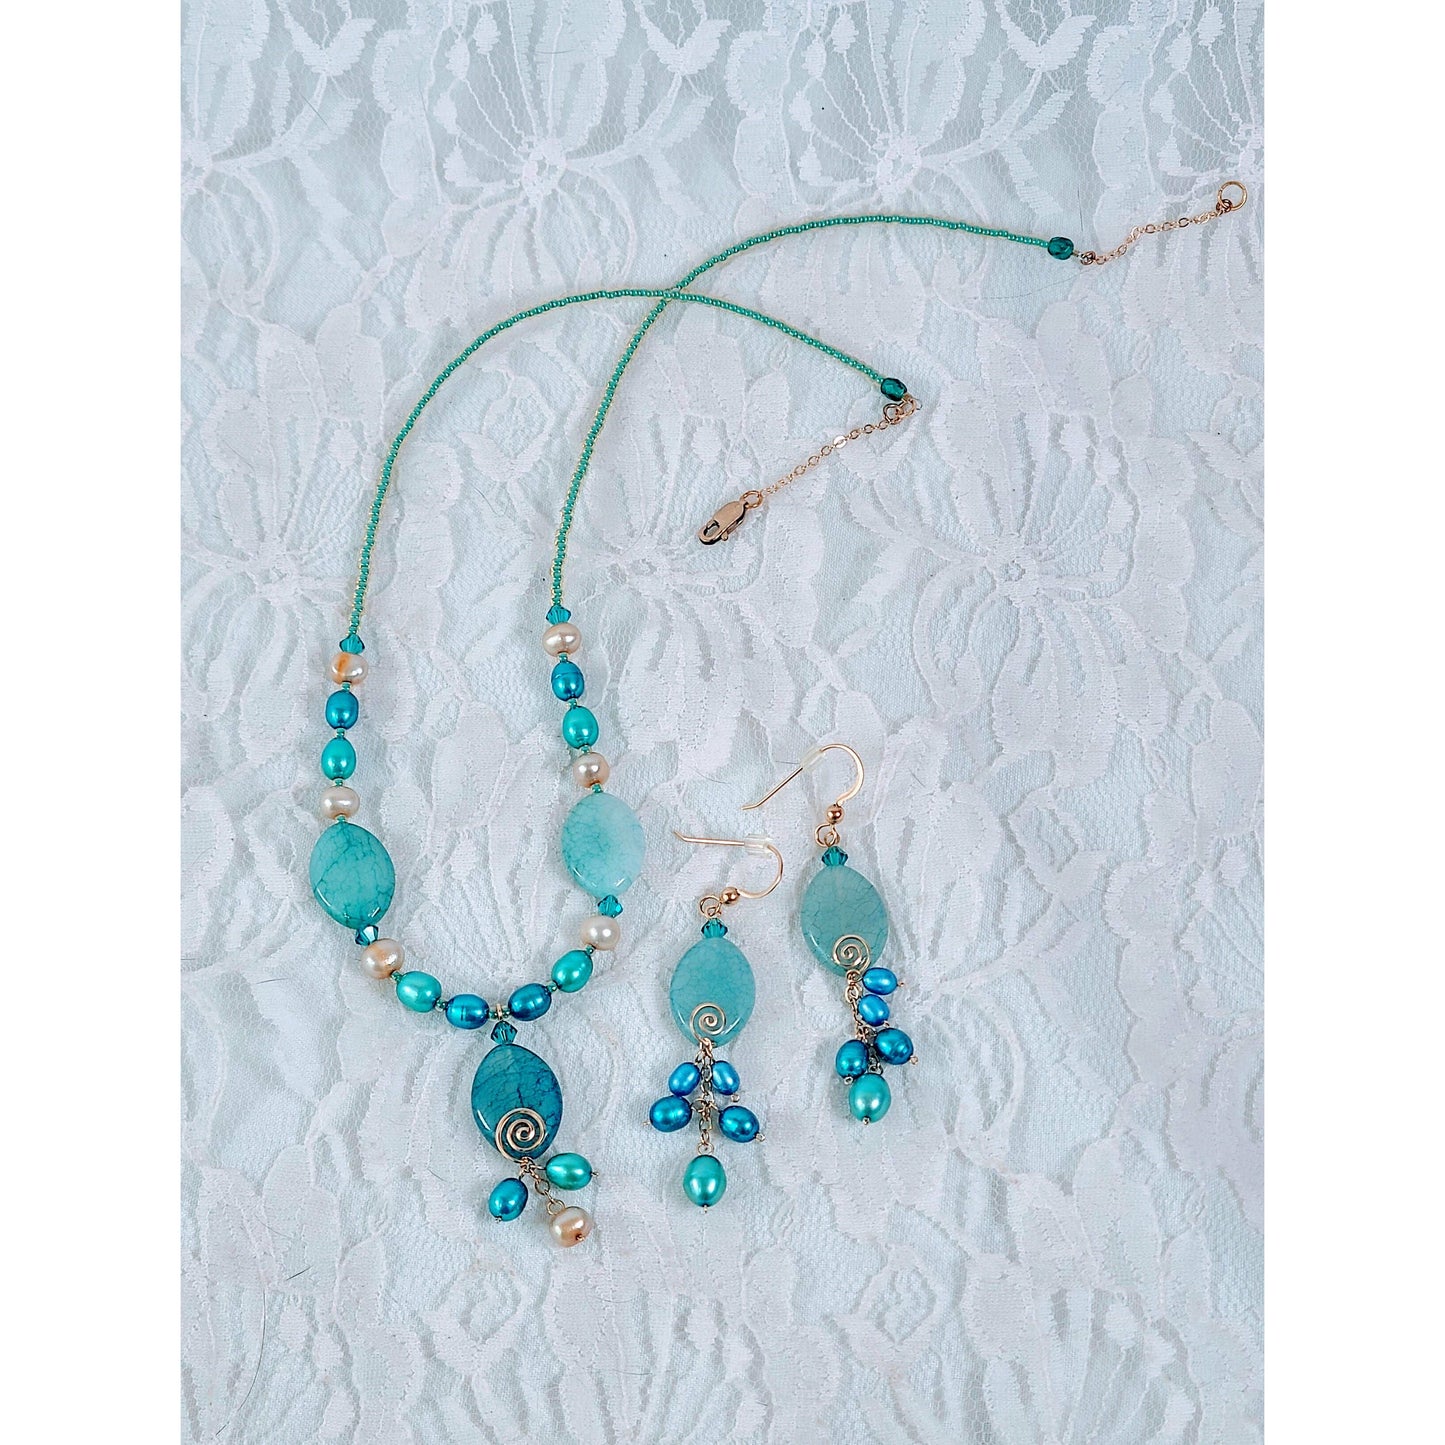 Earrings and Necklace OOAK Jewelry SET Blue Teal Swarovski Crystals and Pearls and Glass Beads with GOLD Accents